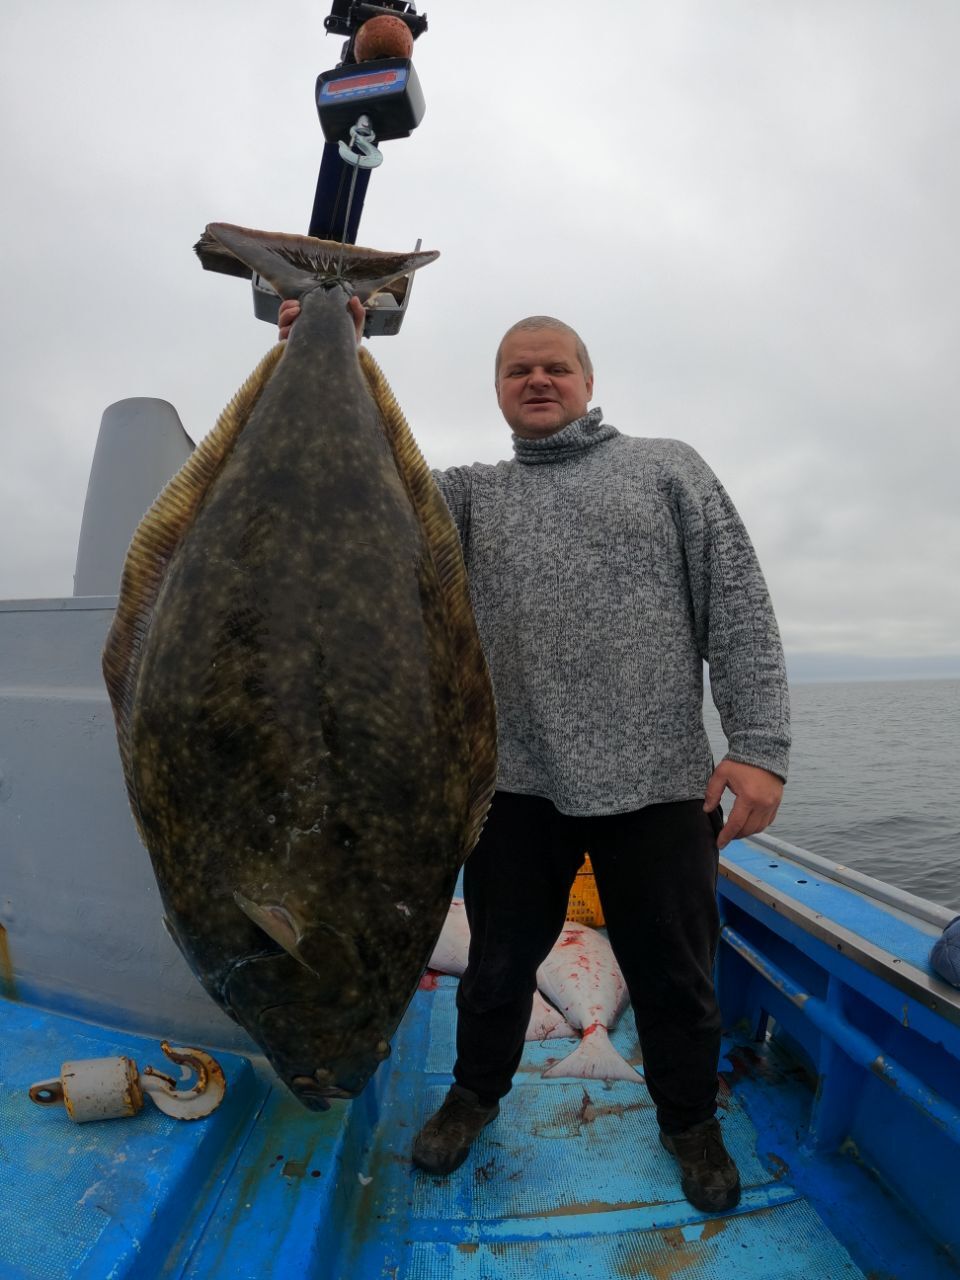 Nothing is such a fish - Fishing, Plaice, Halibut, Boat, Magadan Region, Sea, Video